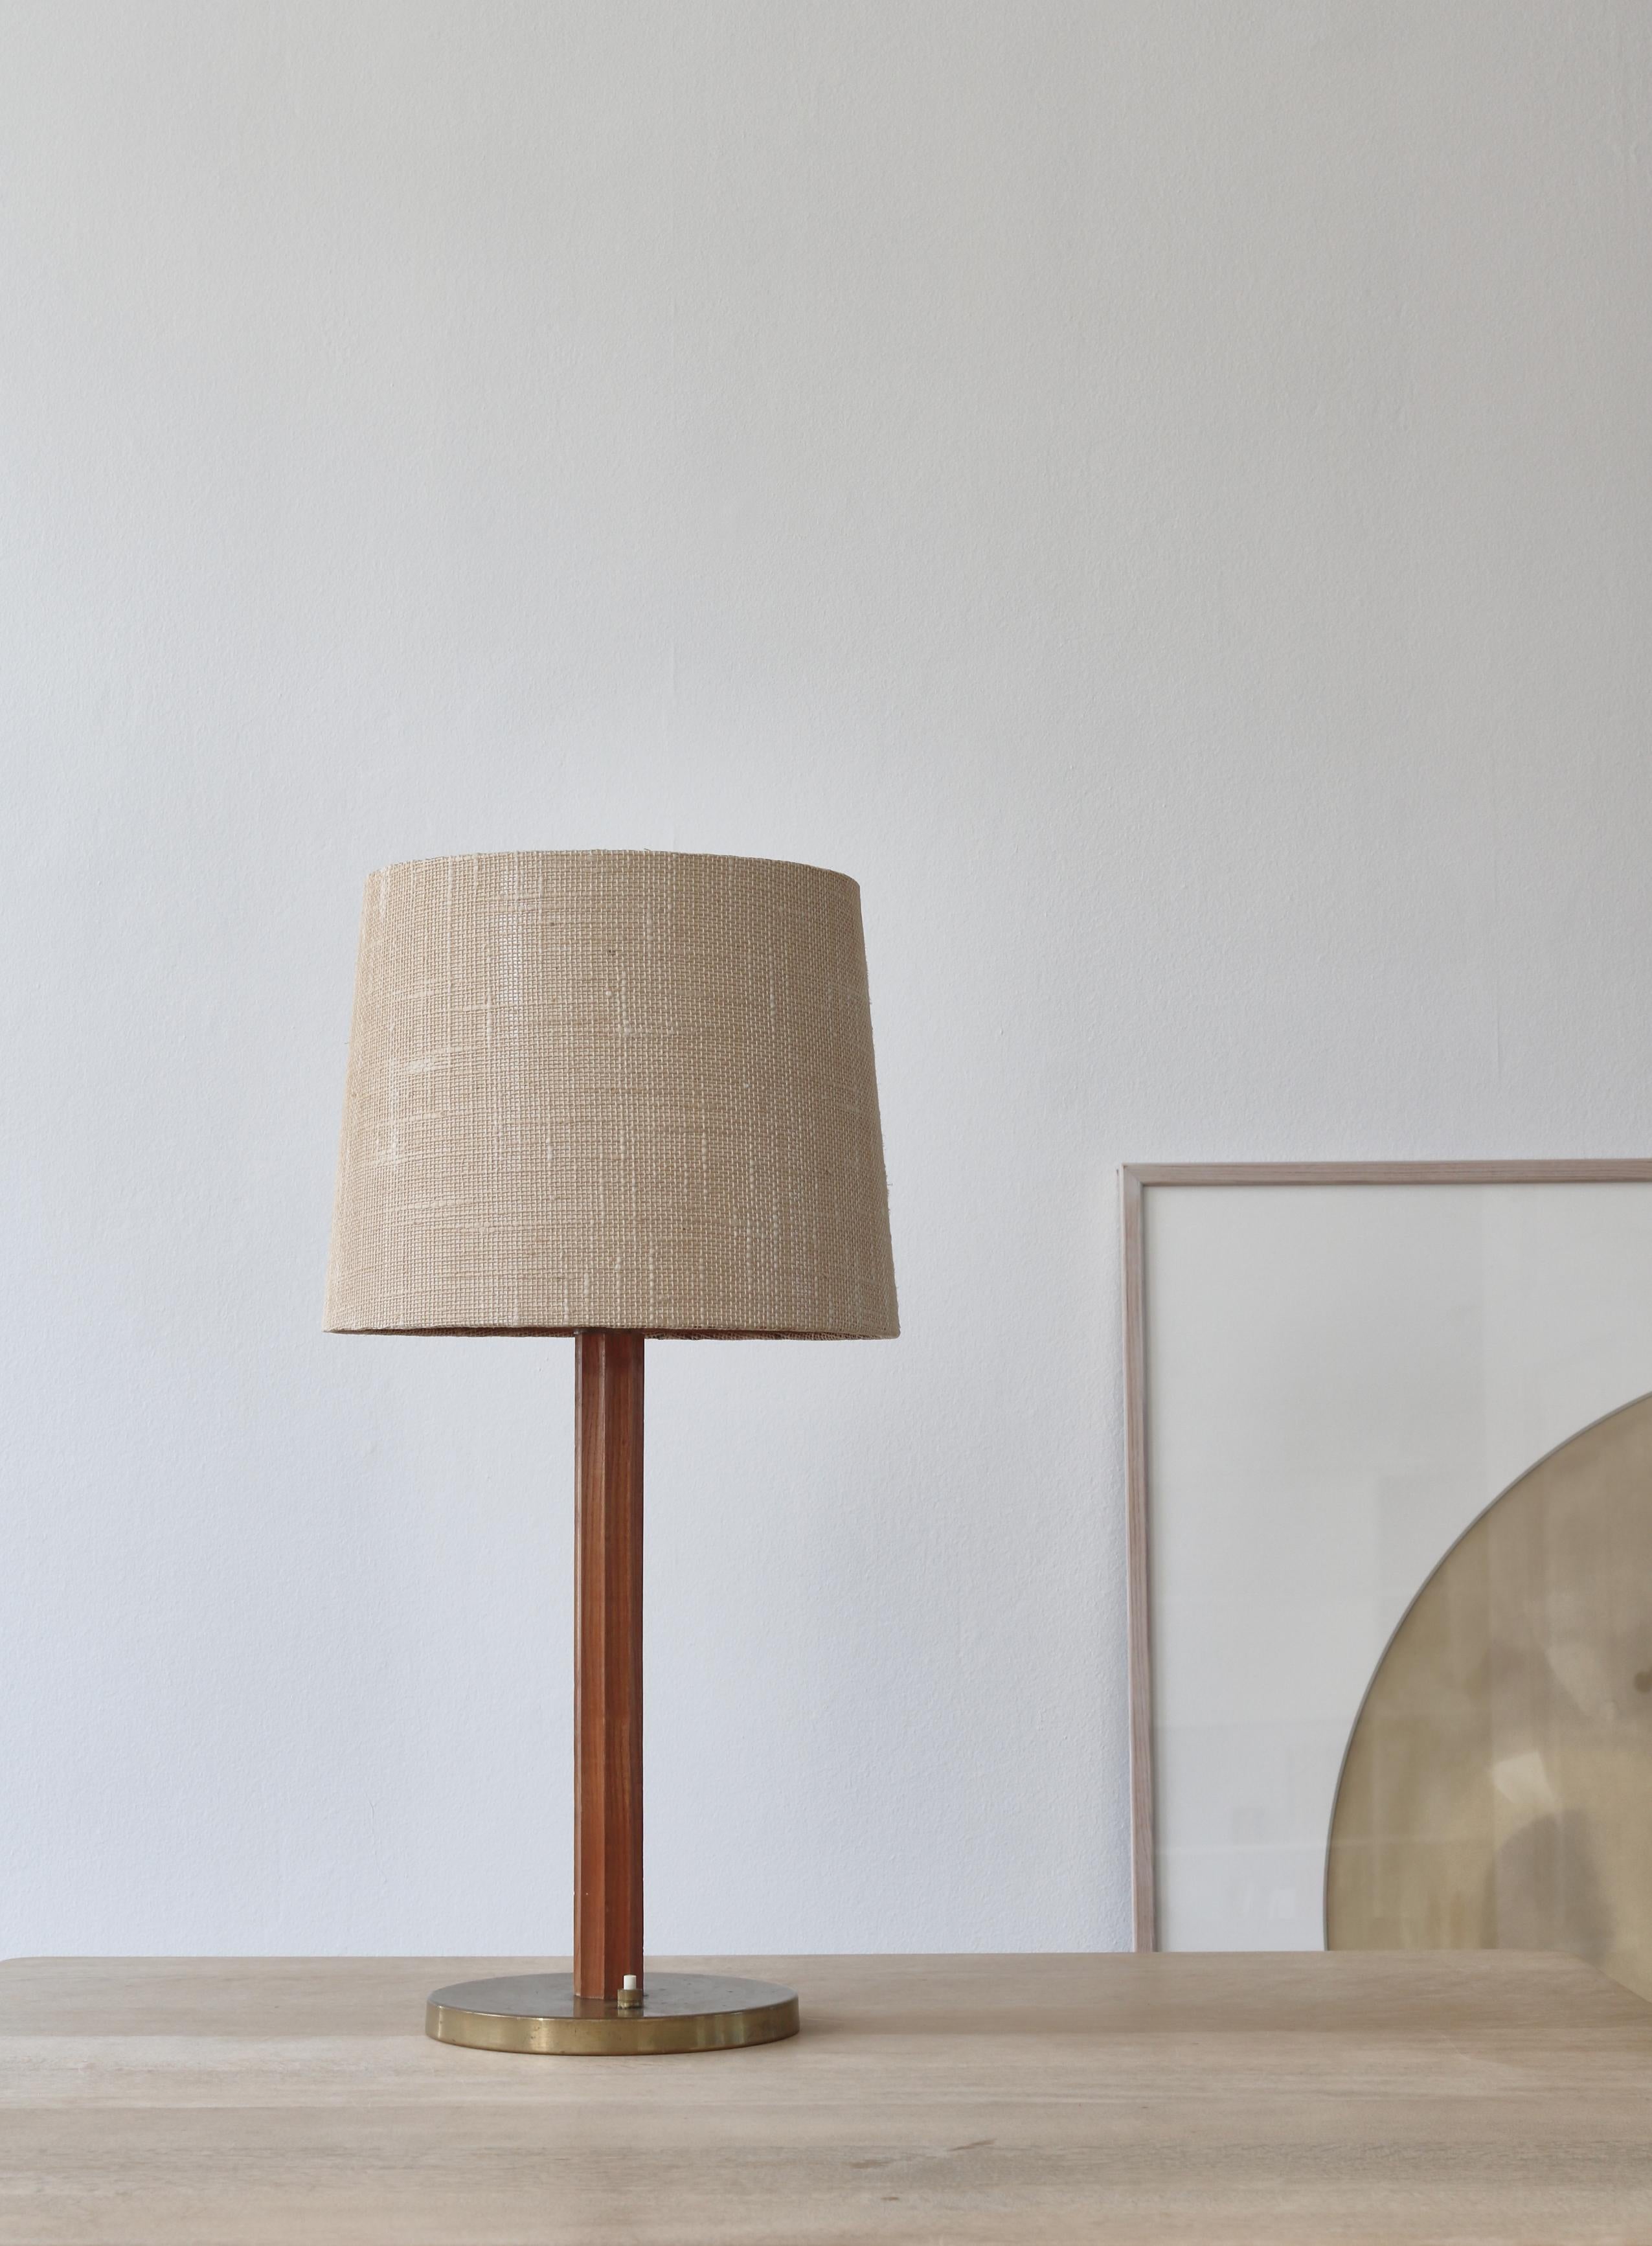 Amazing Scandinavian Modern vintage table lamp manufactured by LYFA, Copenhagen in the 1950s. Base in beautifully patinated brass and stem in solid elm wood. Marked 